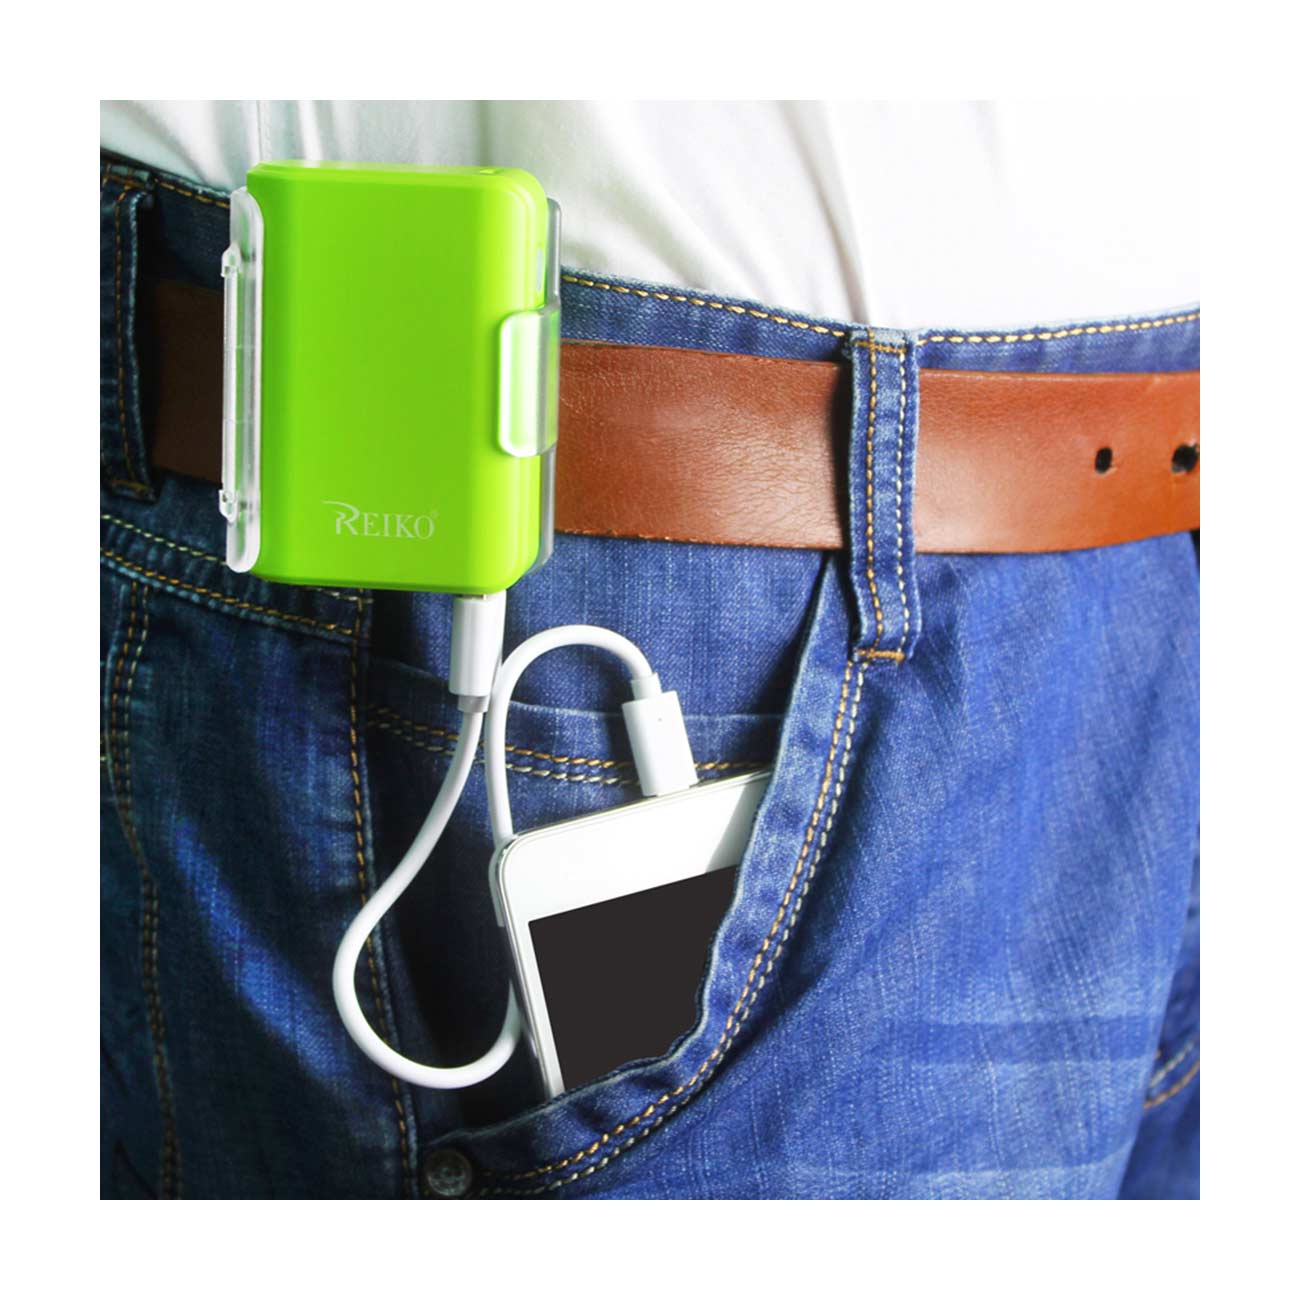 Reiko 4000Mah Universal Power Bank With Cable In Green